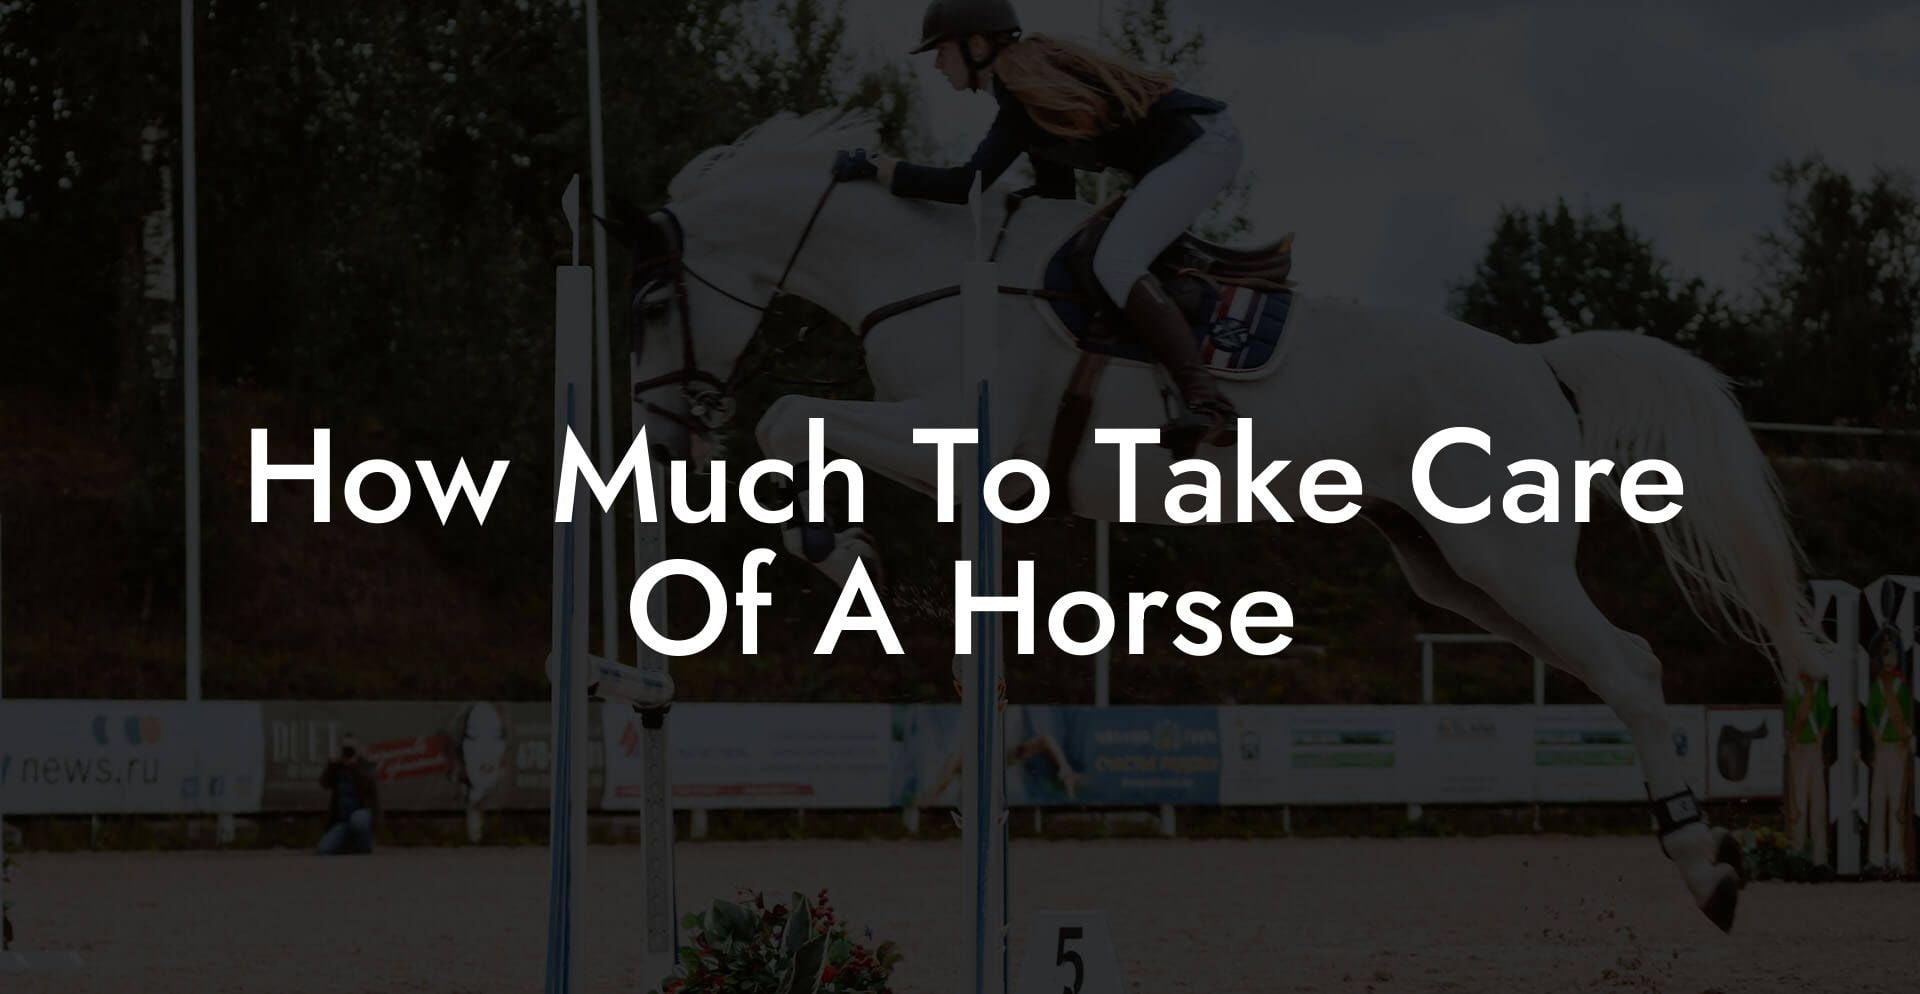 How Much To Take Care Of A Horse